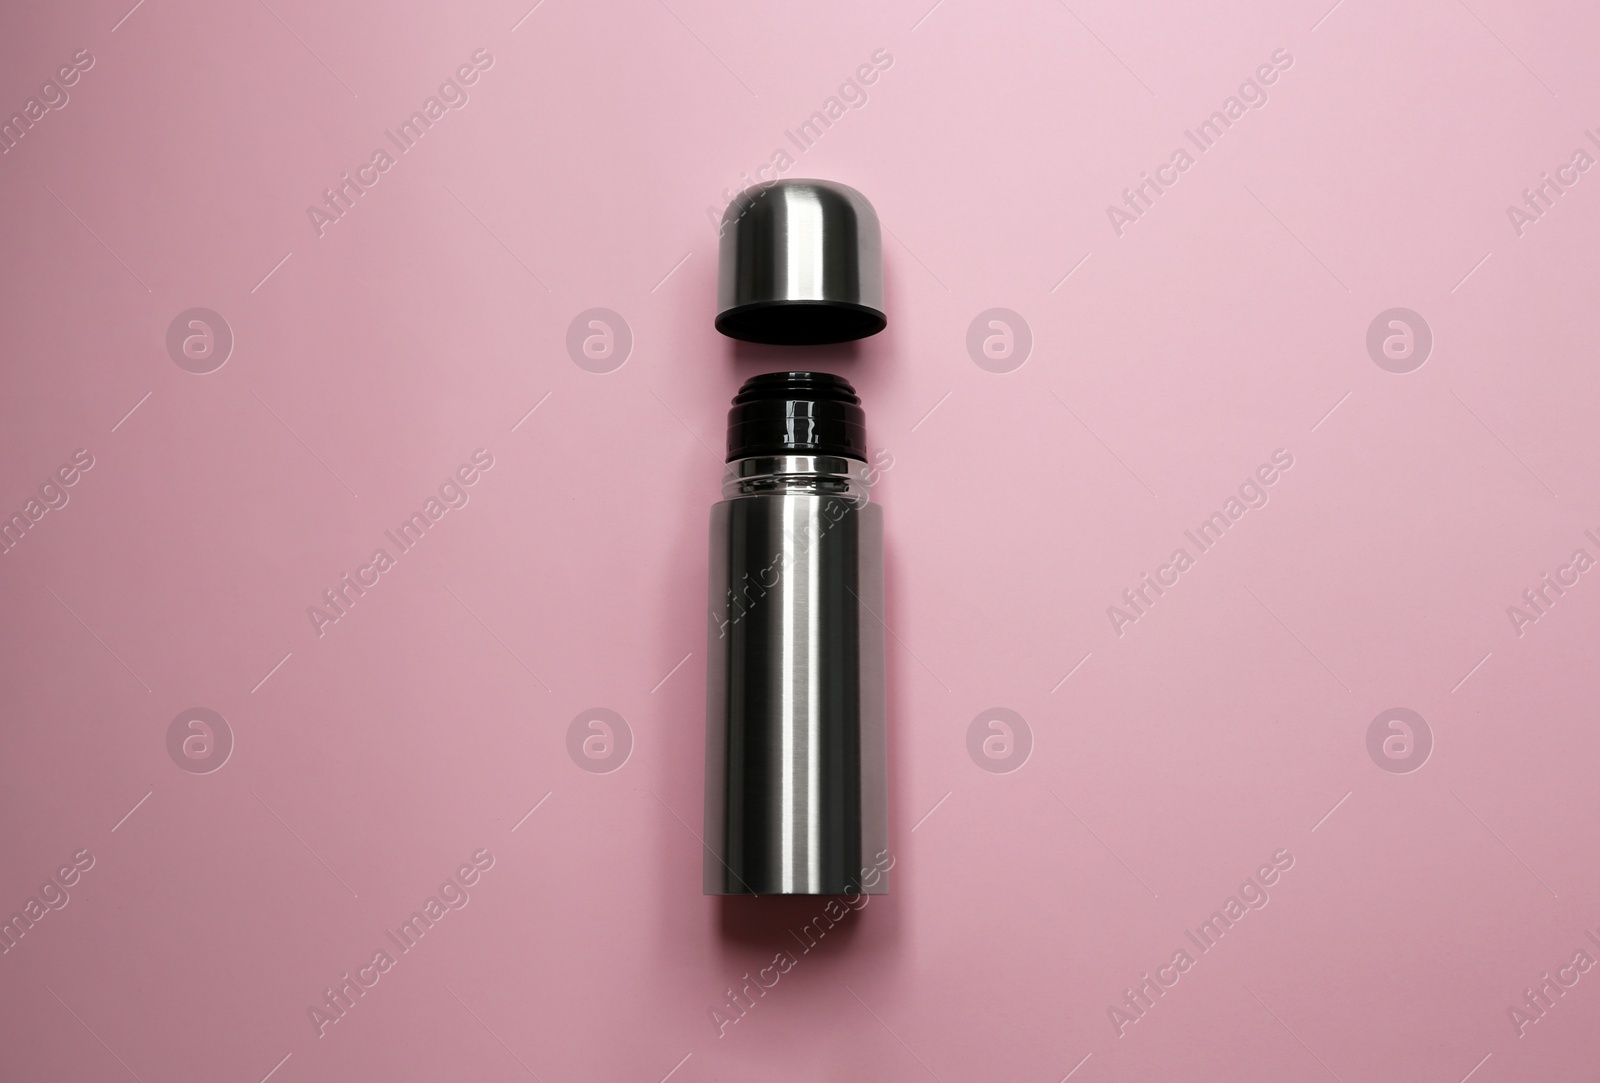 Photo of Stainless steel thermos on pink background, top view